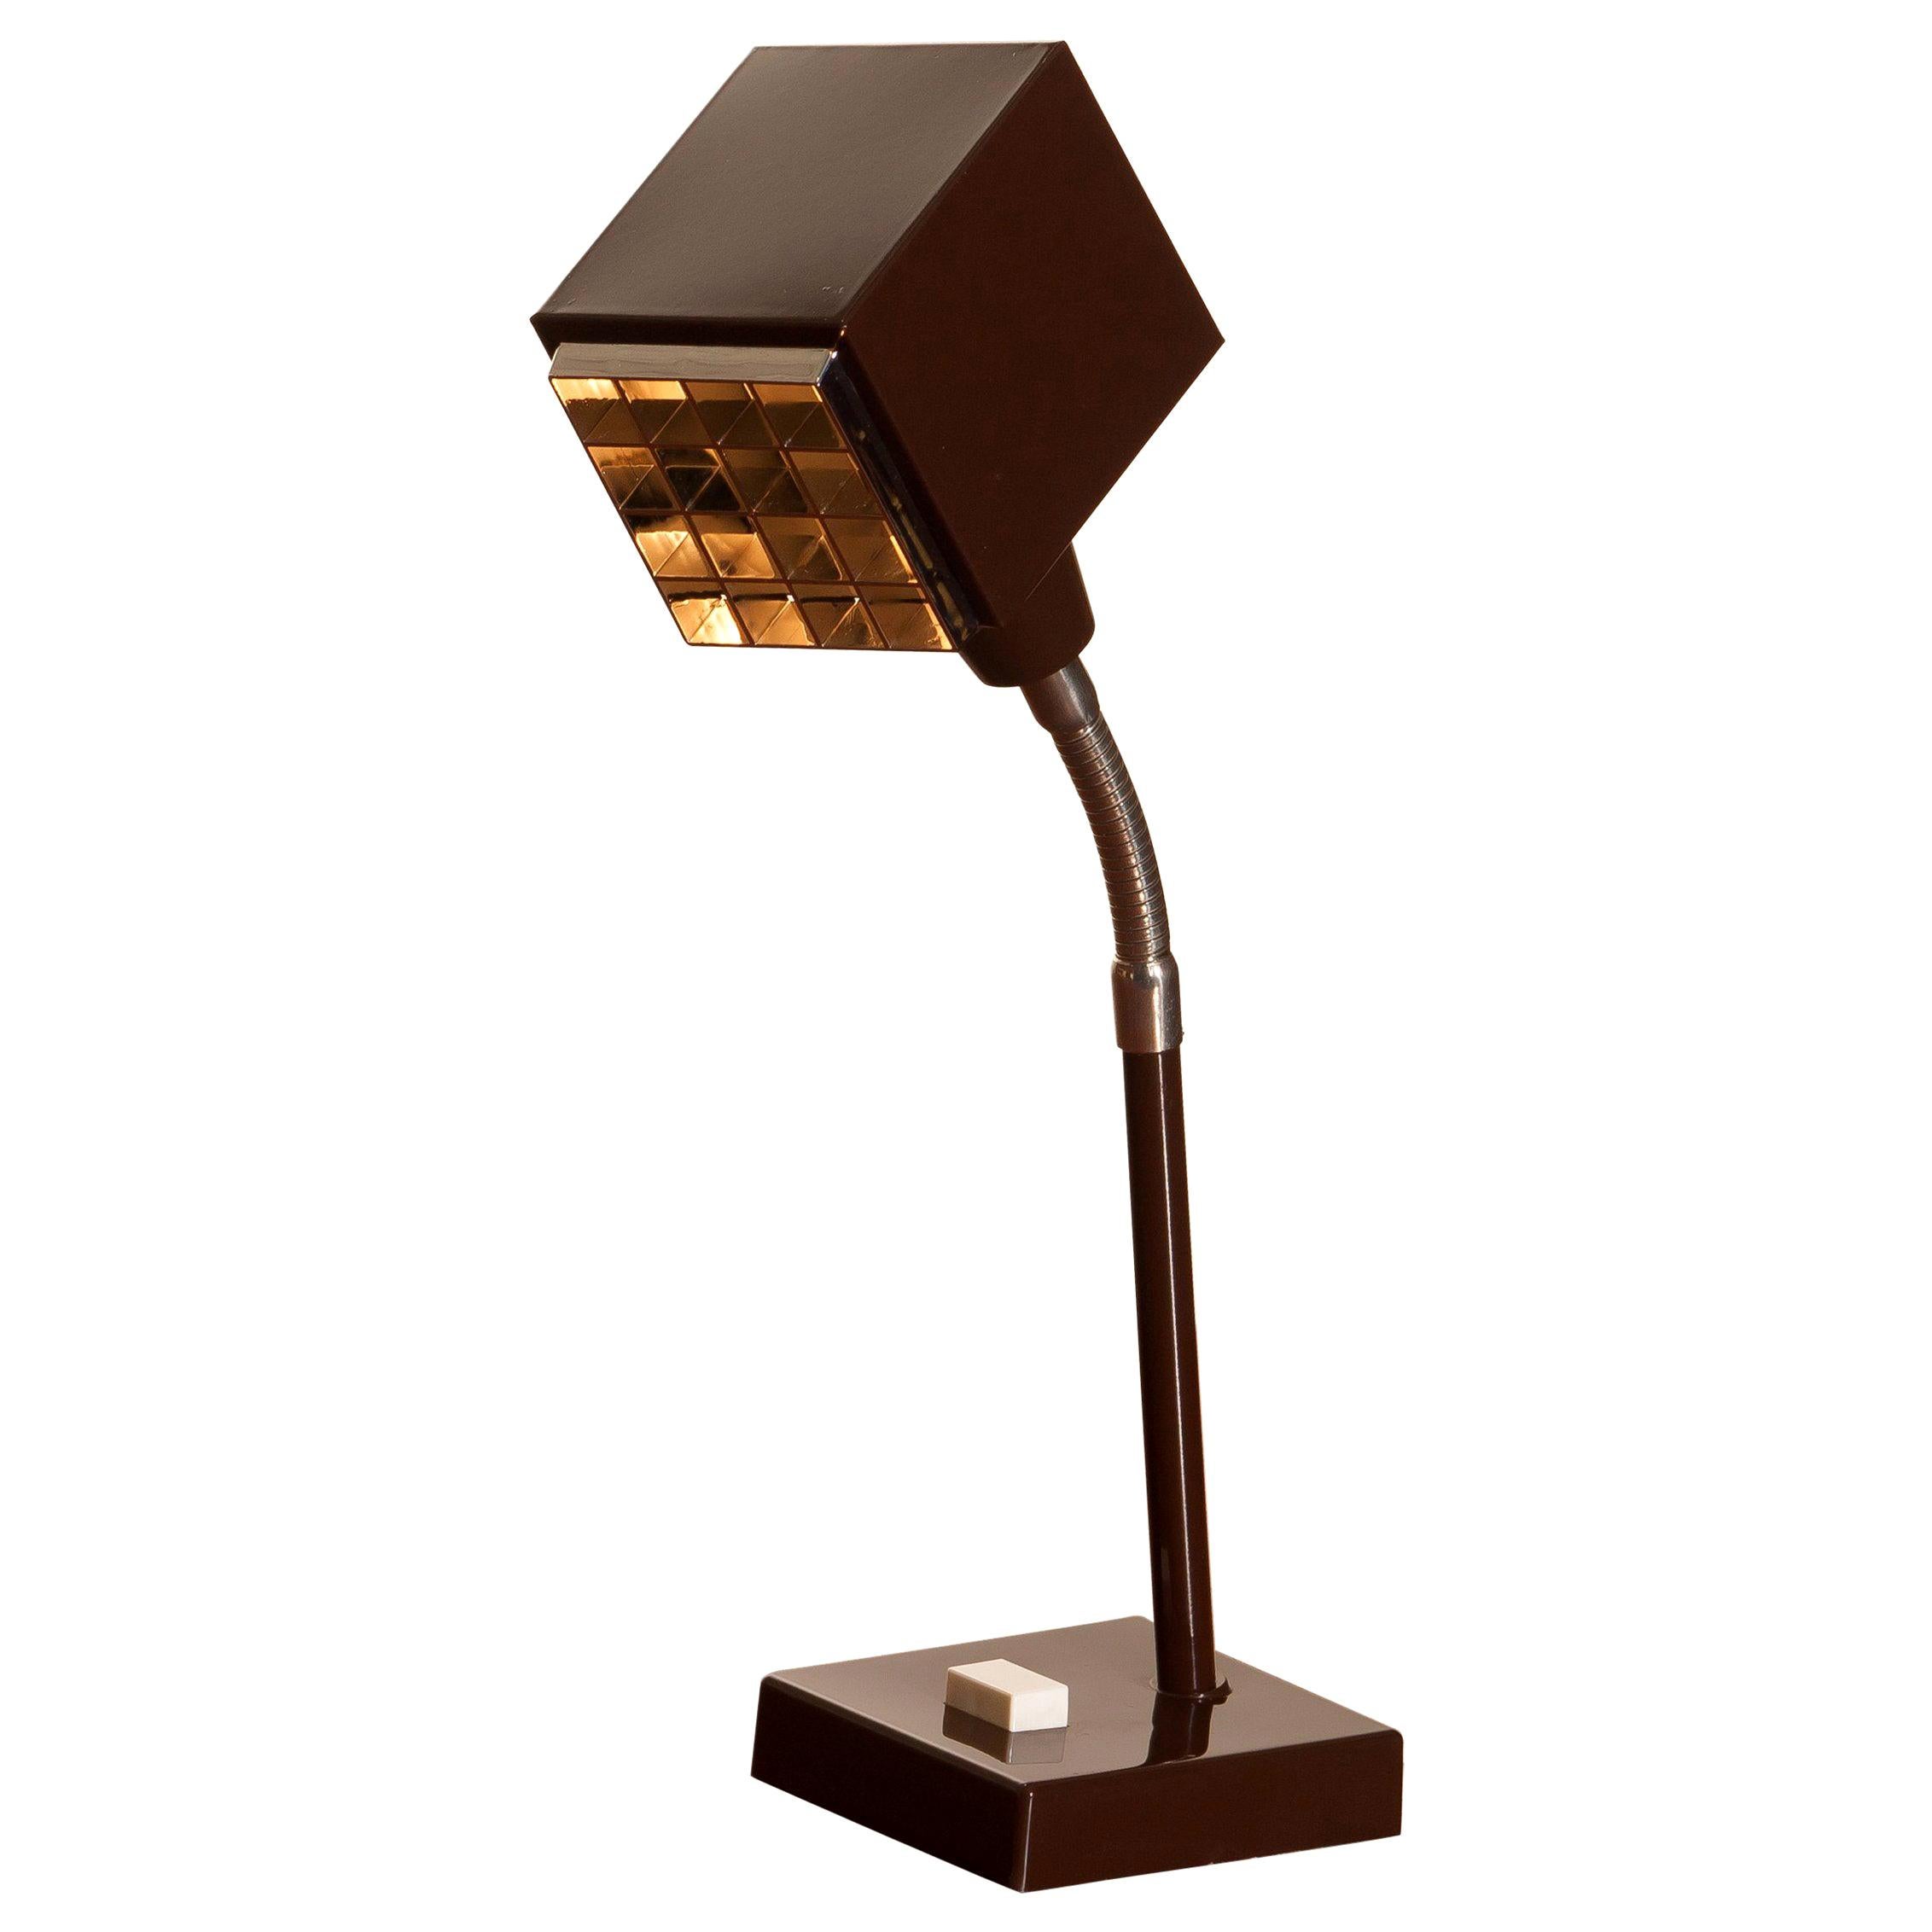 Desk lamp in dark brown metal and designed by Hans-Anne Jakobsson for Elidus.
The famous 